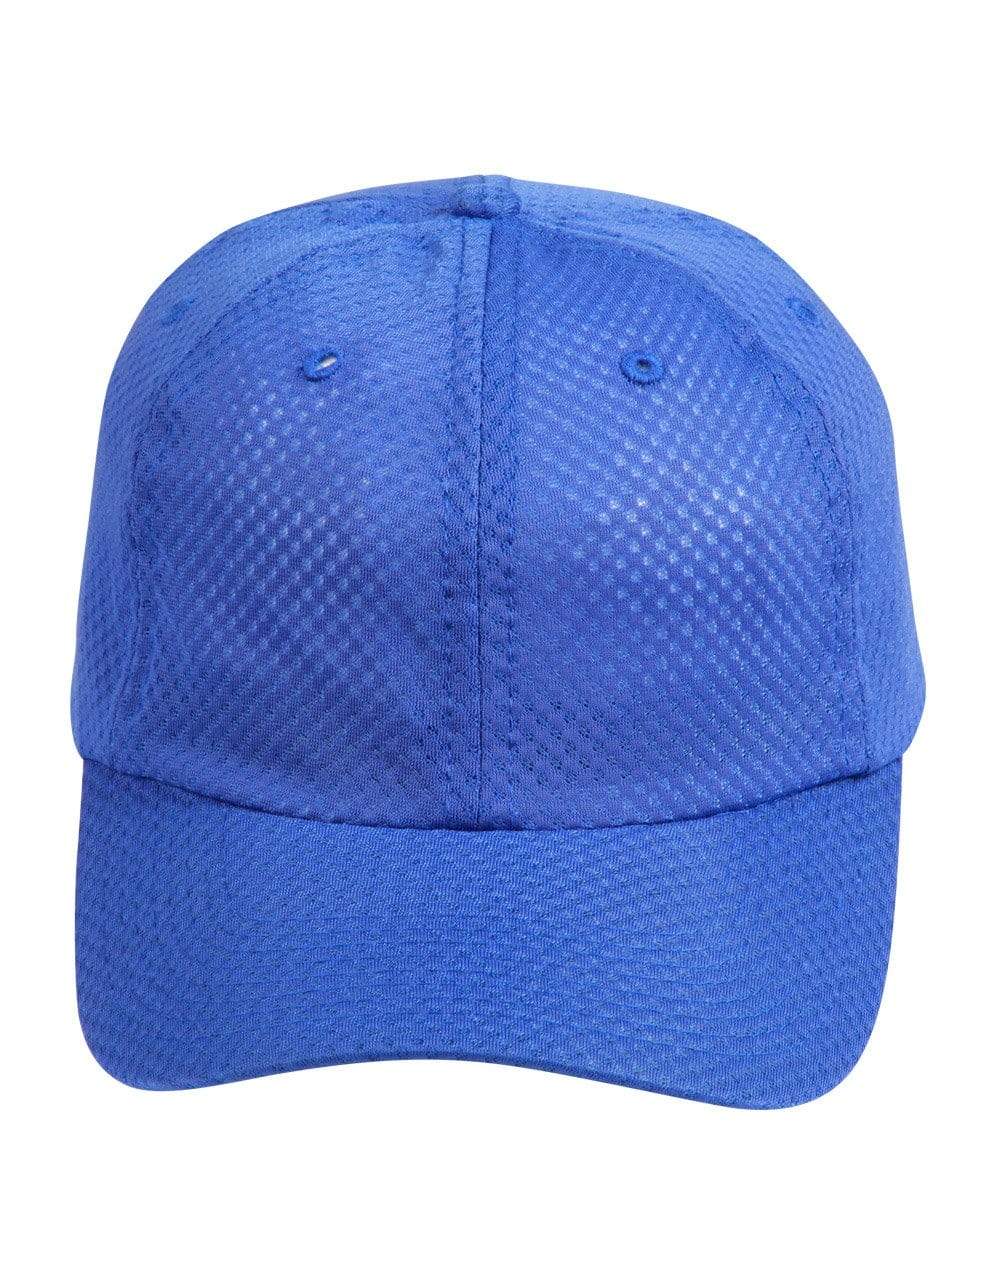 Athletic Mesh Cap CH20 Active Wear Winning Spirit Royal One size 